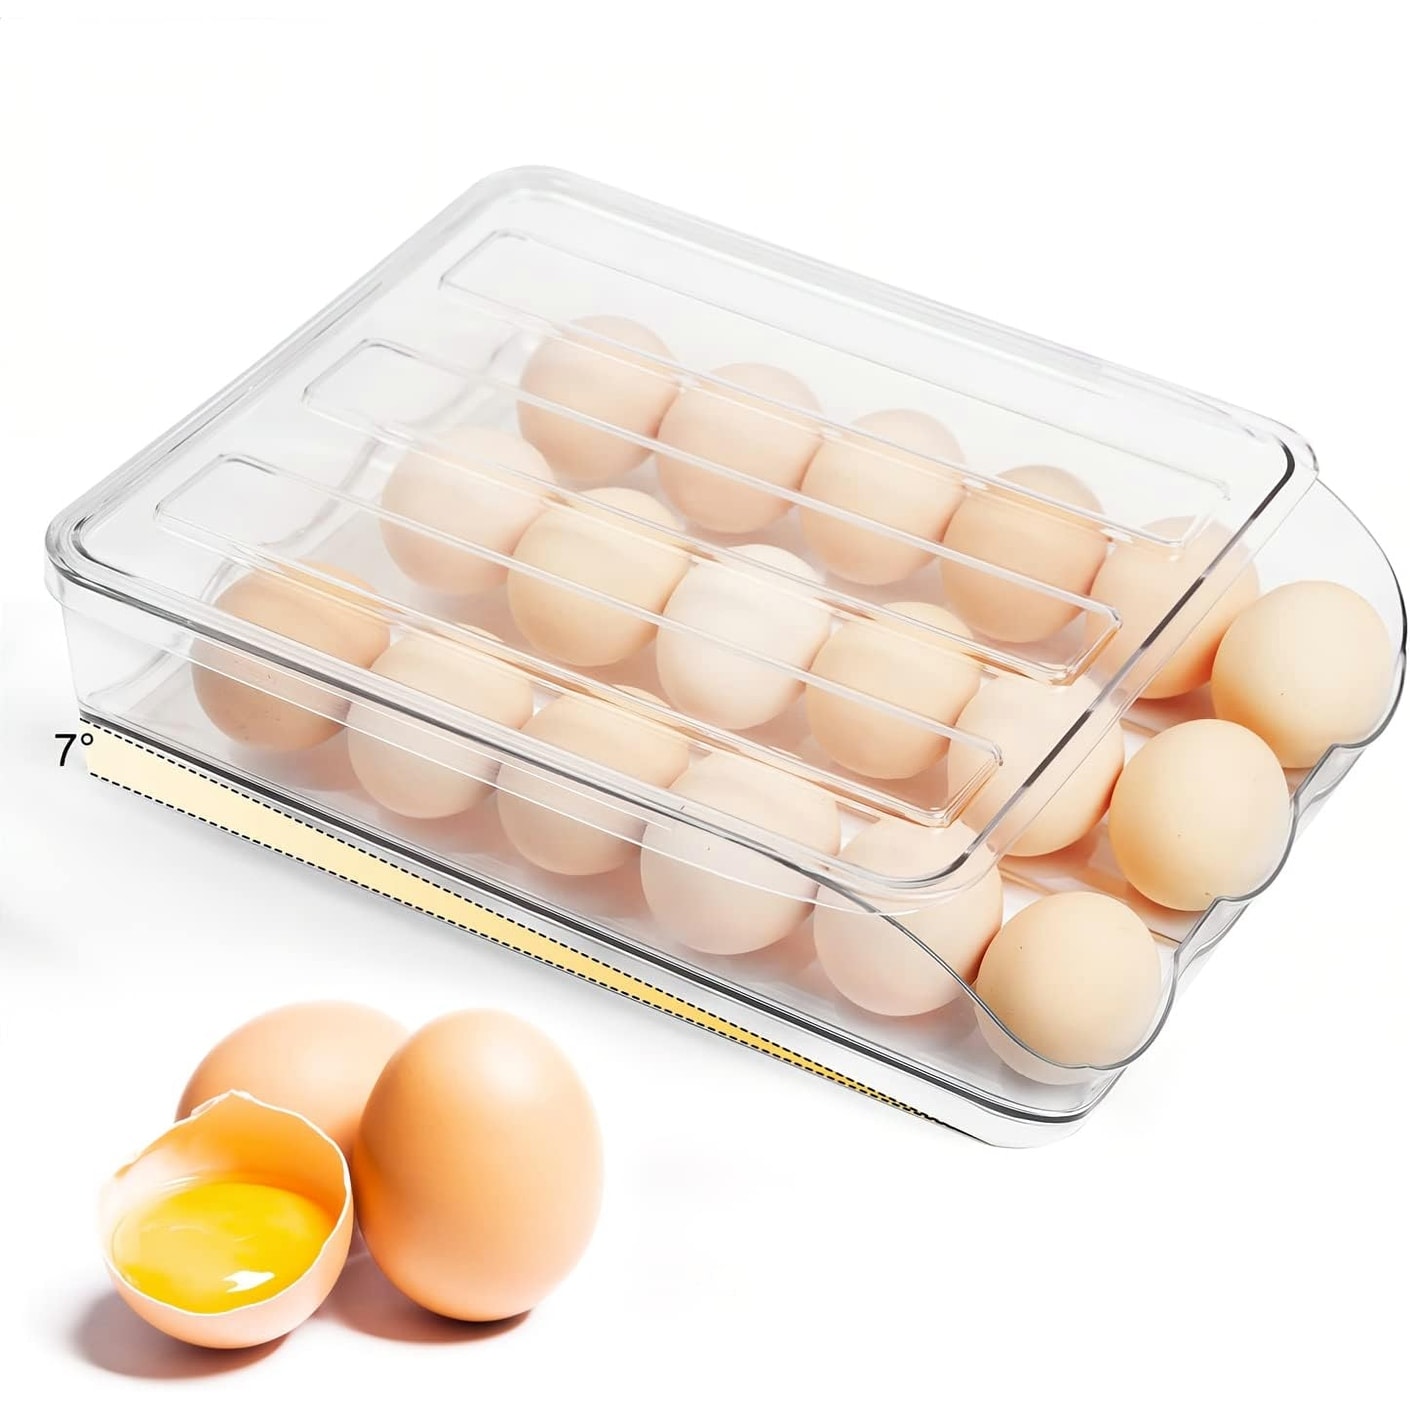 https://ak1.ostkcdn.com/images/products/is/images/direct/50cadd4aa98942fa4d472a498253a6badc748470/Auto-Rolling-Storage-Container-18-Egg-Tray.jpg